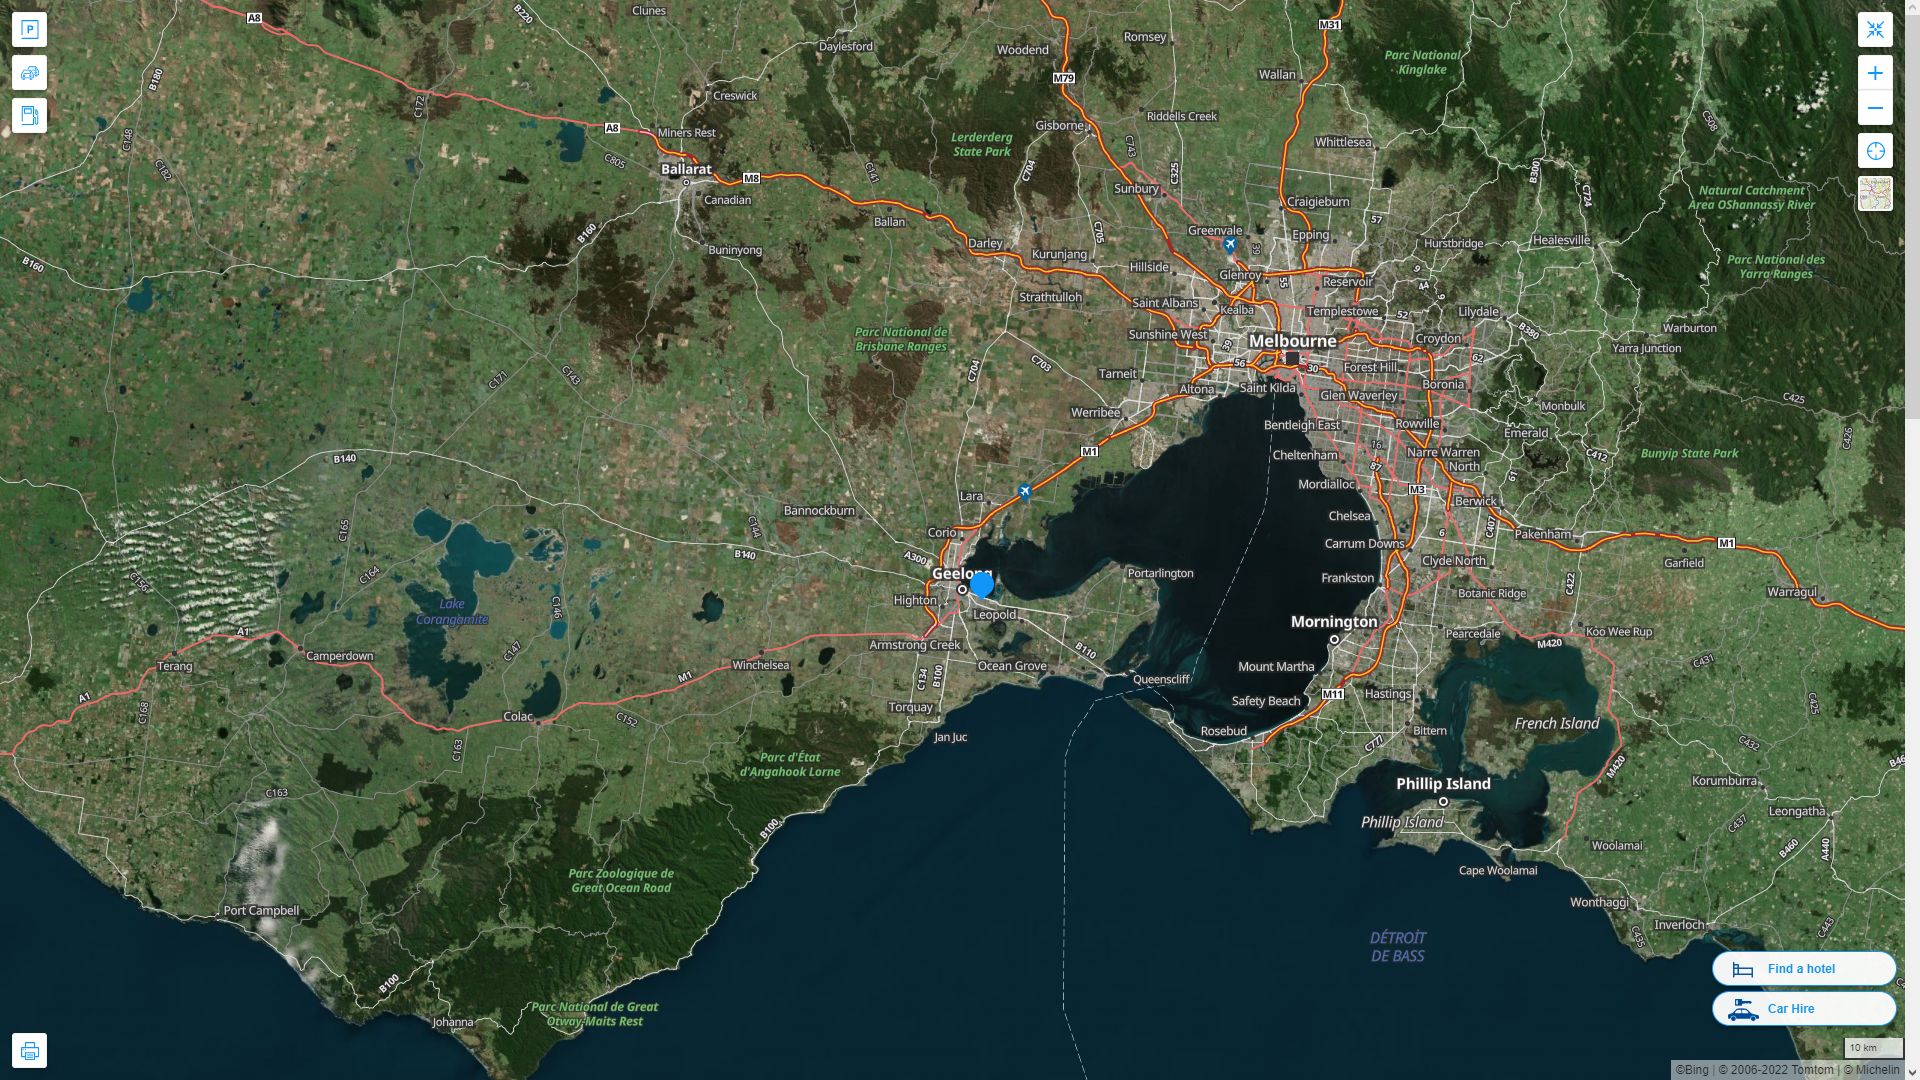 Geelong Highway and Road Map with Satellite View